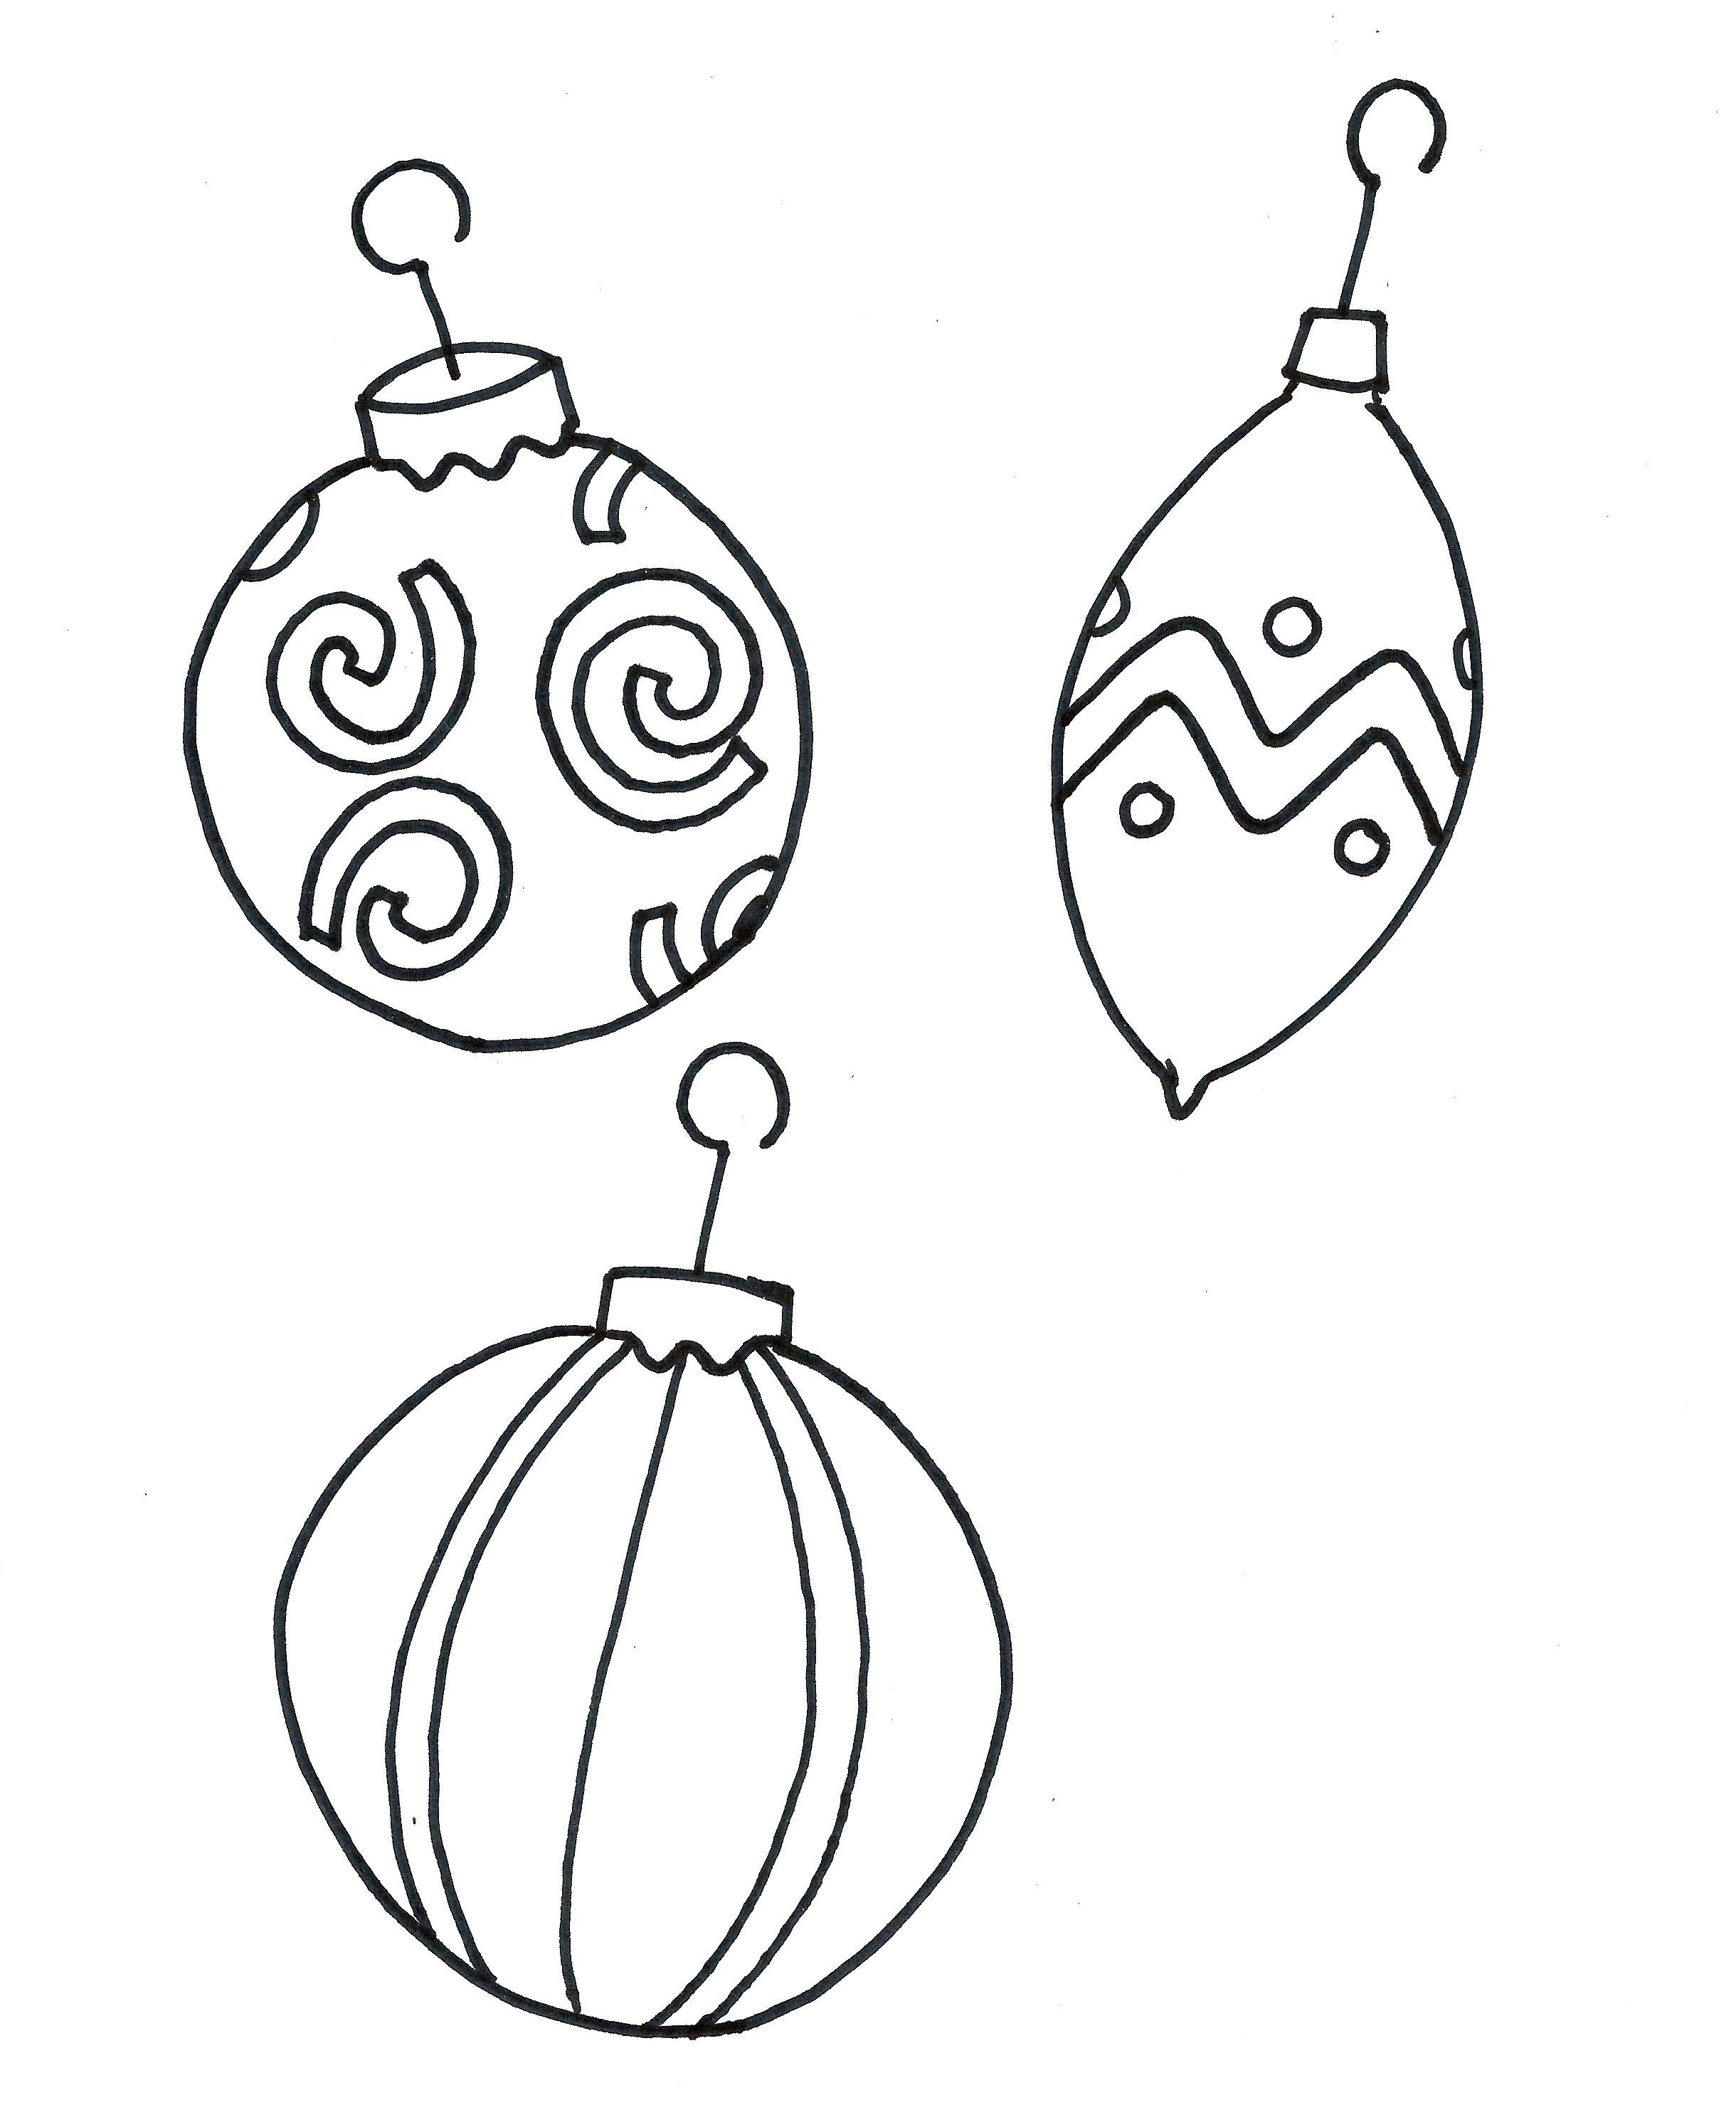 Printable Coloring Pages Christmas Ornament Free | Christmas Crafts - Free Printable Christmas Tree Ornaments Coloring Pages